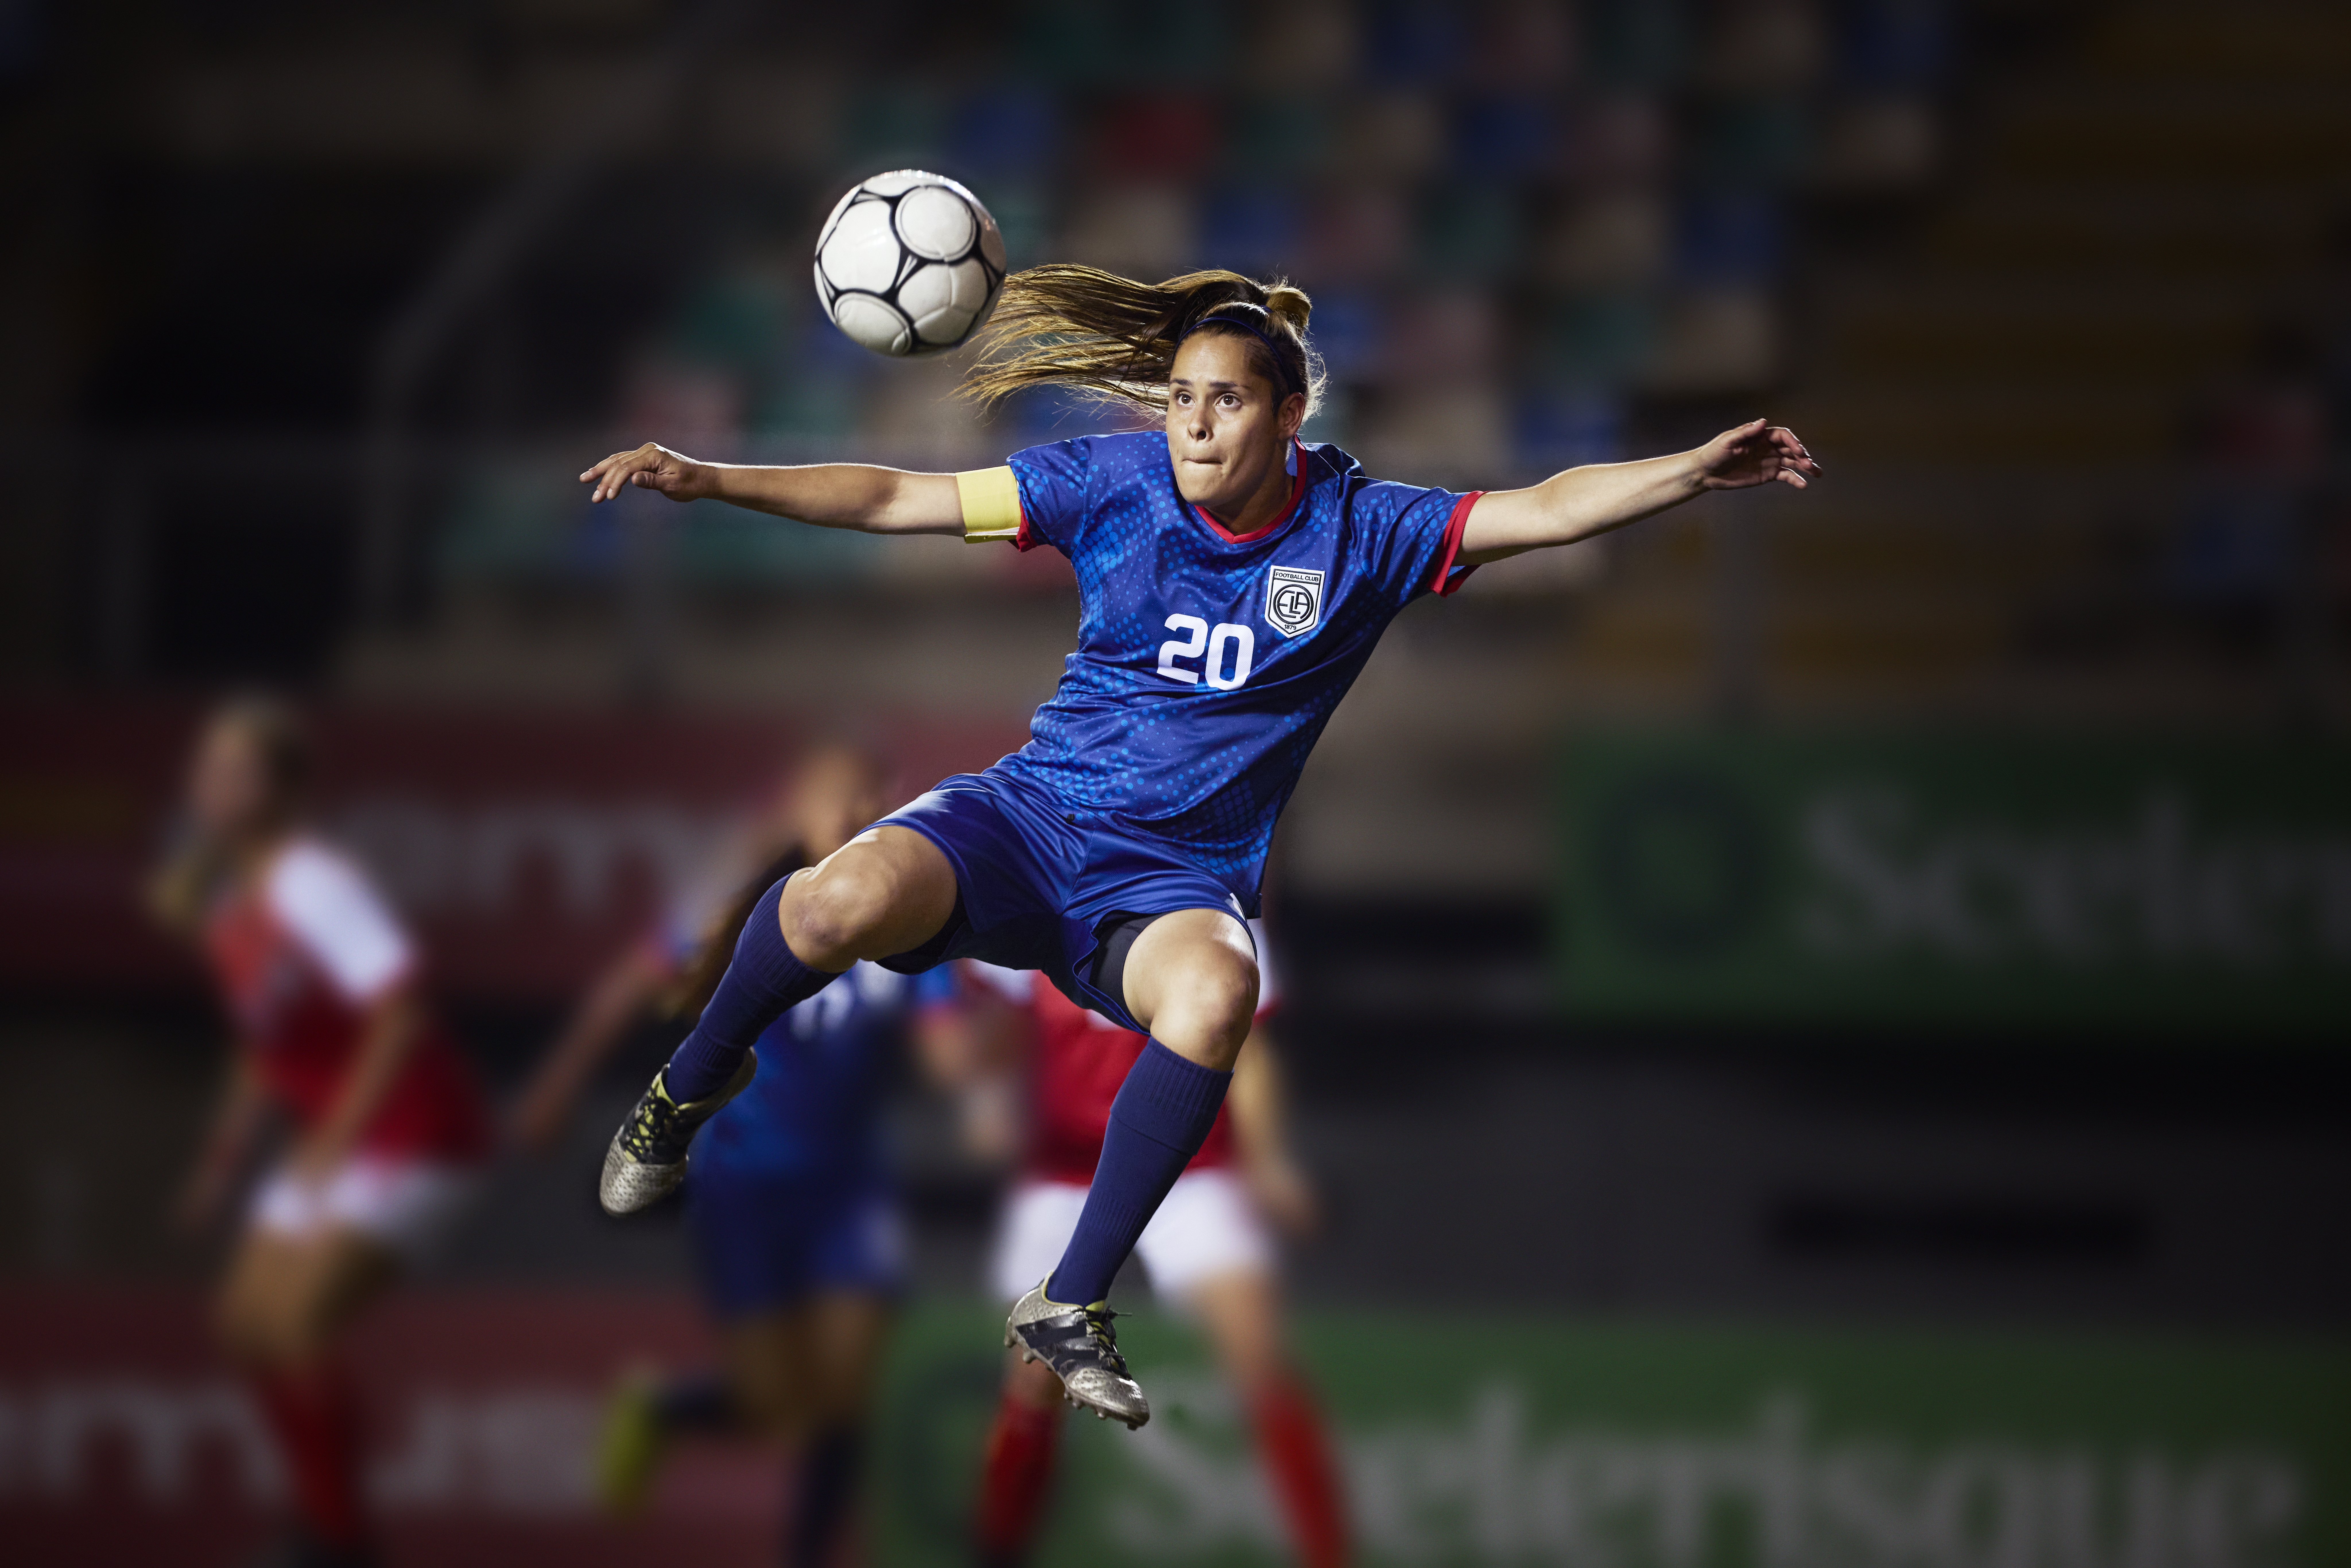 Action shot of a serious professional female soccer player that is focusing on the soccer ball in preparation to strike it in mid-air into the goal. Female soccer player with brown hair and a royal blue uniform with the number 20 on the jersey.